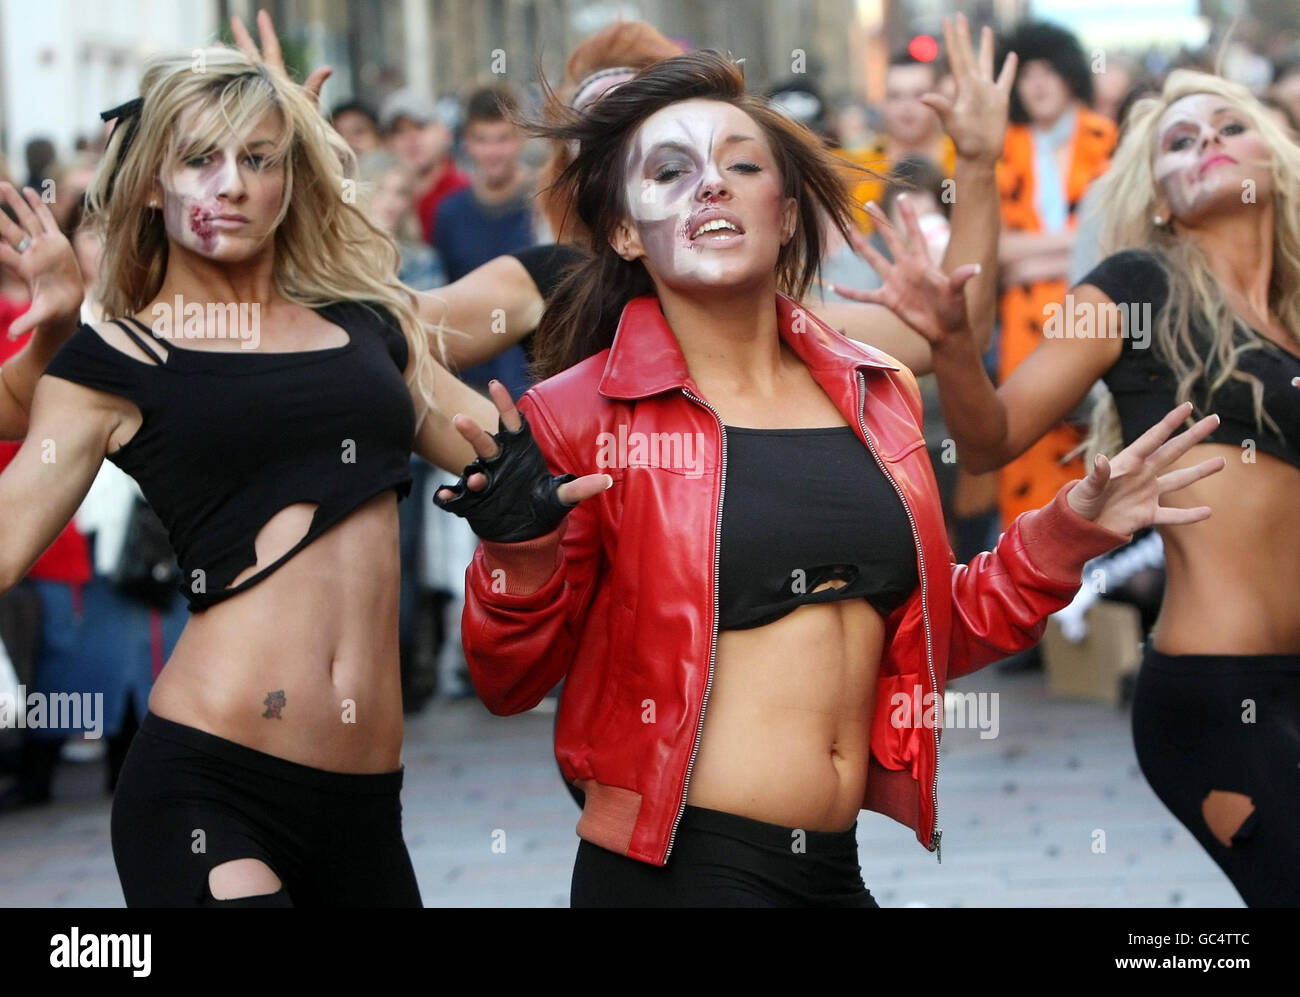 Gemma McKee leads the Scottish Rockettes in a recreation of Michael Jackson's Thriller music video on Buchanan Street in Glasgow, to promote a Halloween themed night at the Karibu Klub. Stock Photo